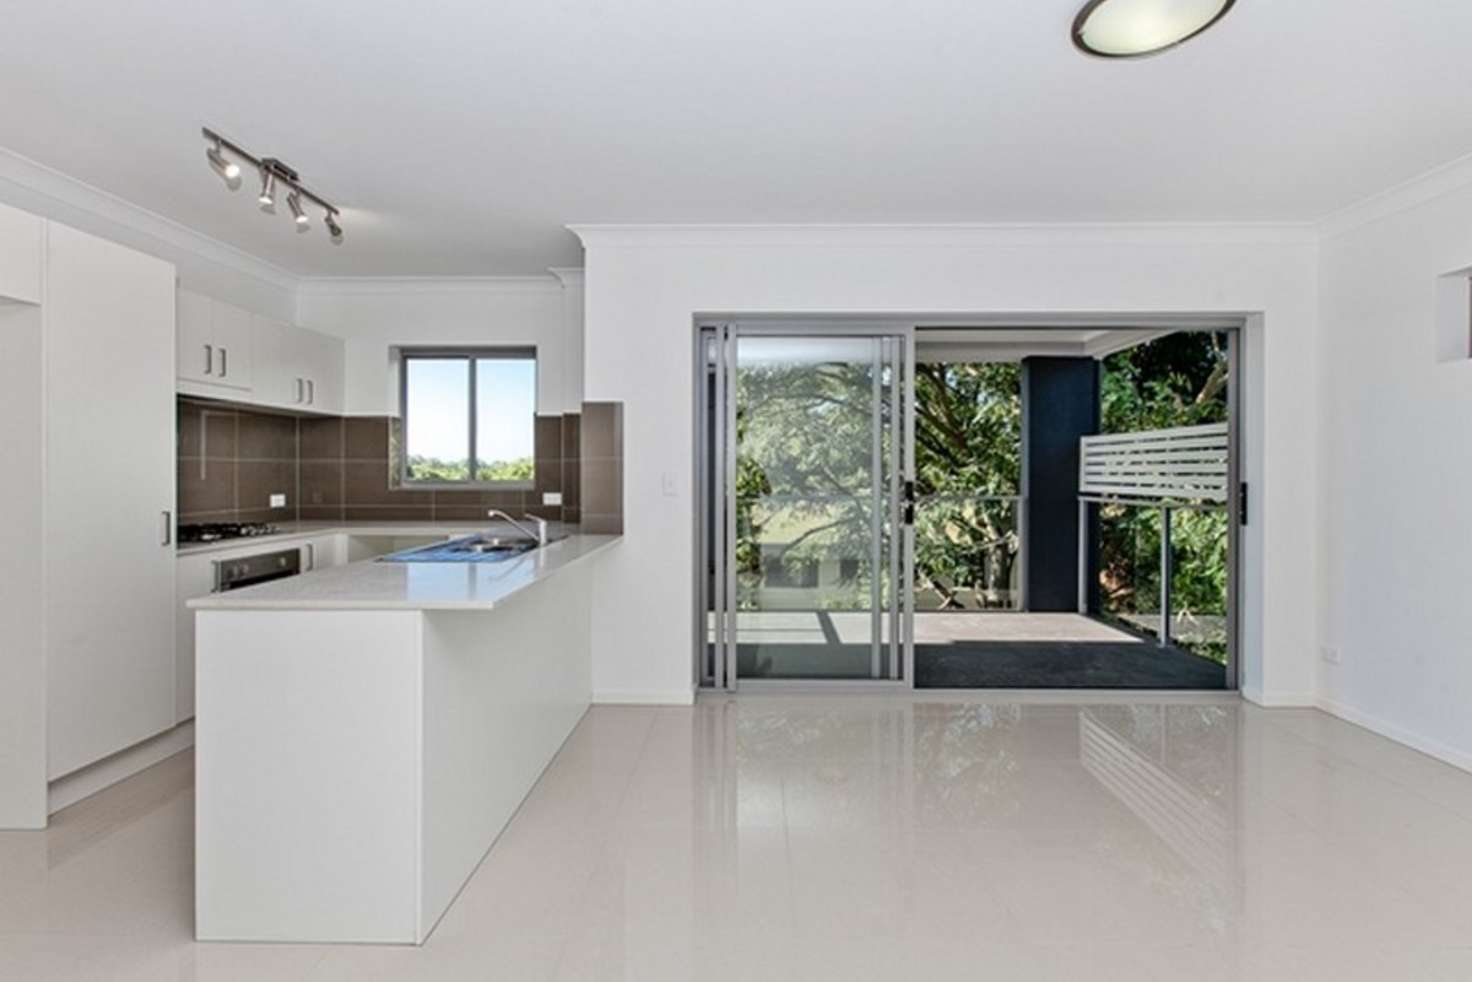 Main view of Homely apartment listing, 7/23 Grasspan Street, Zillmere QLD 4034